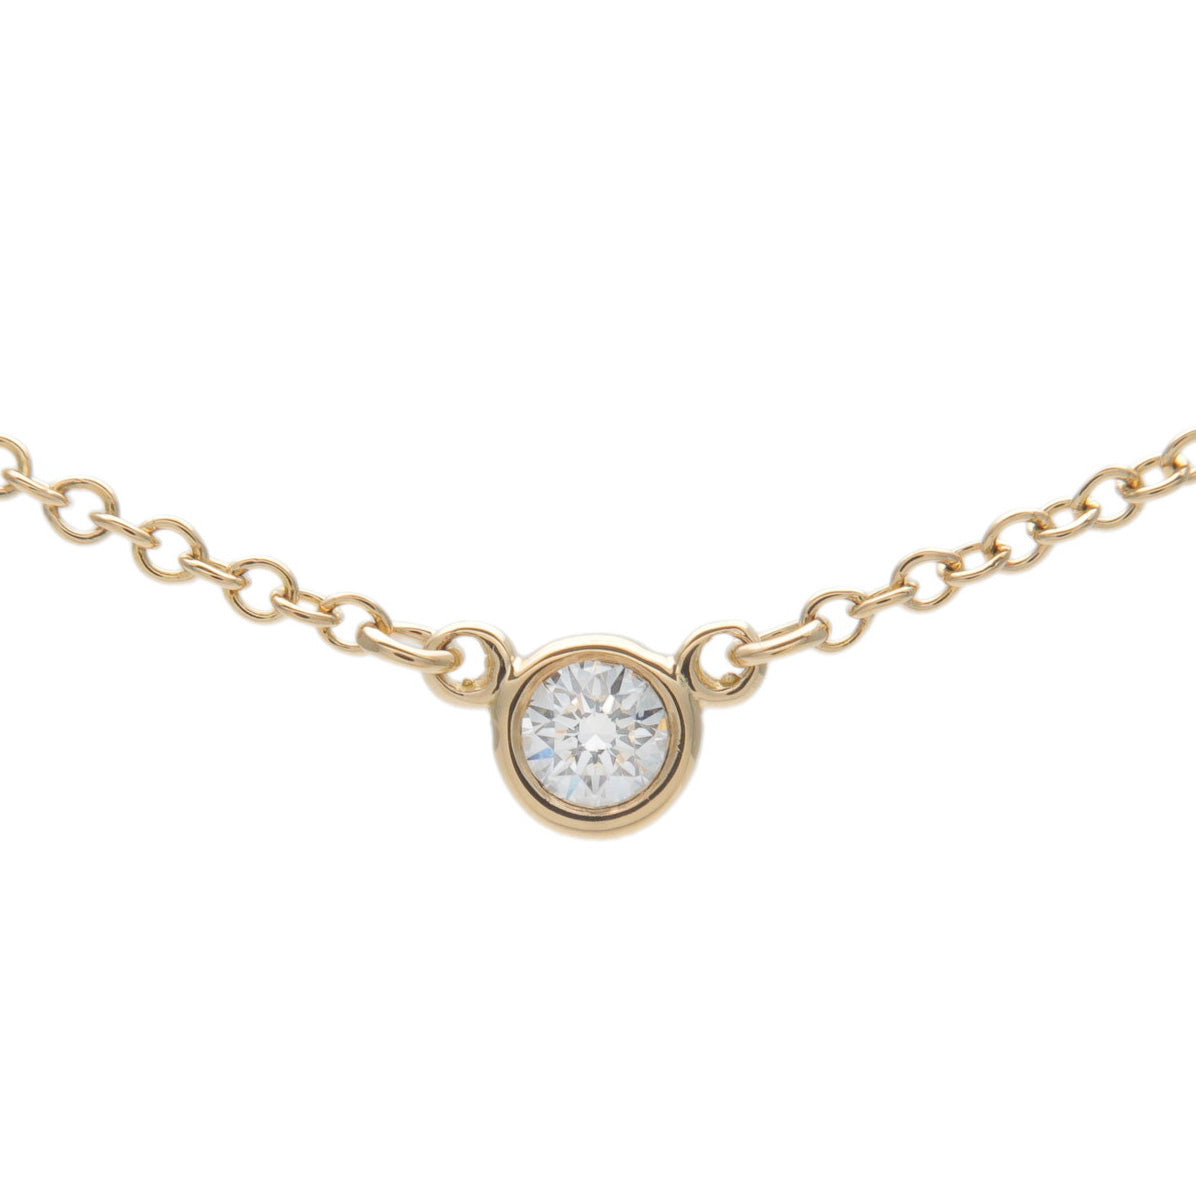 Tiffany&Co.-By-the-Yard-1P-Diamond-Necklace-0.05ct-K18-Yellow-Gold